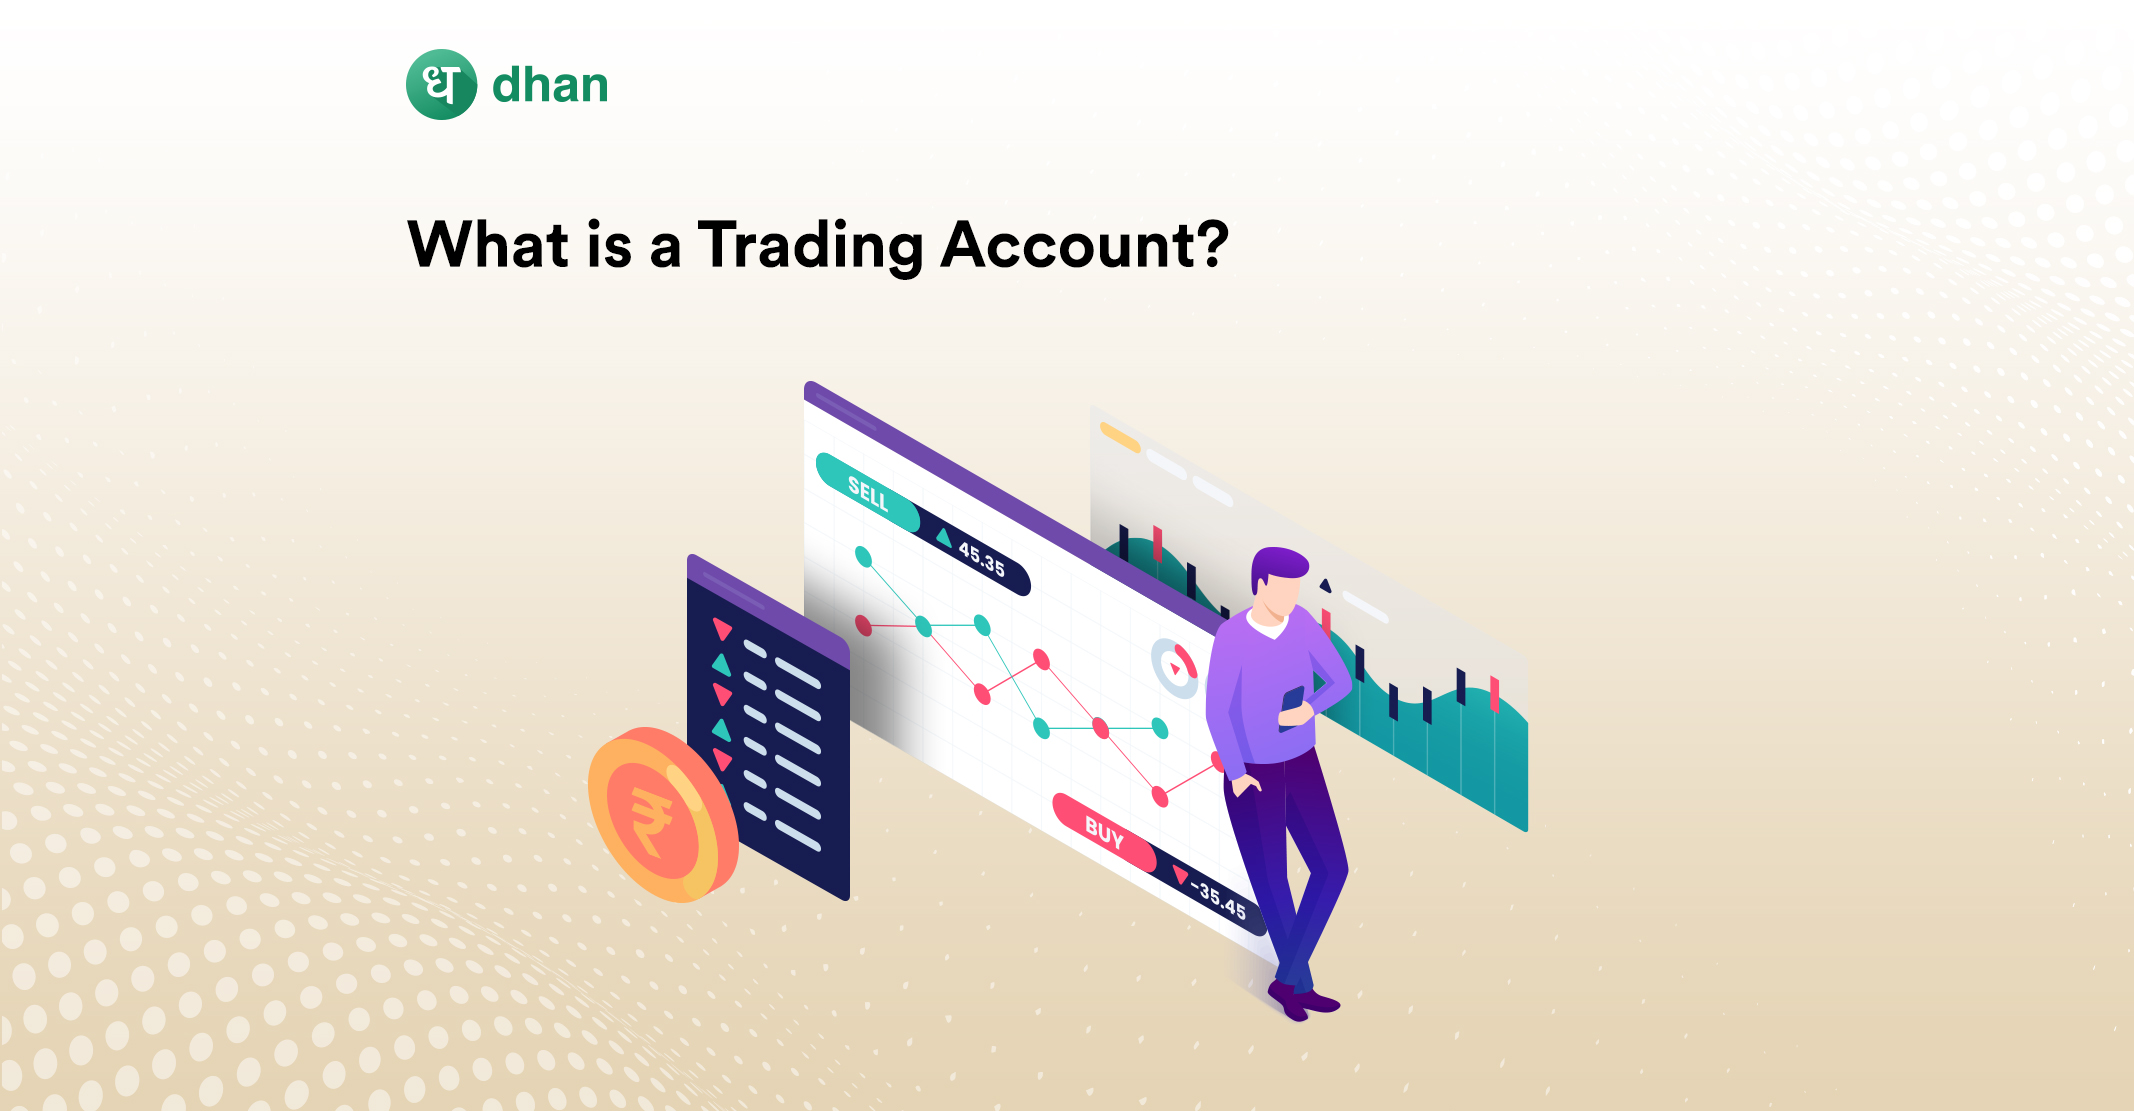 What is a Trading Account?